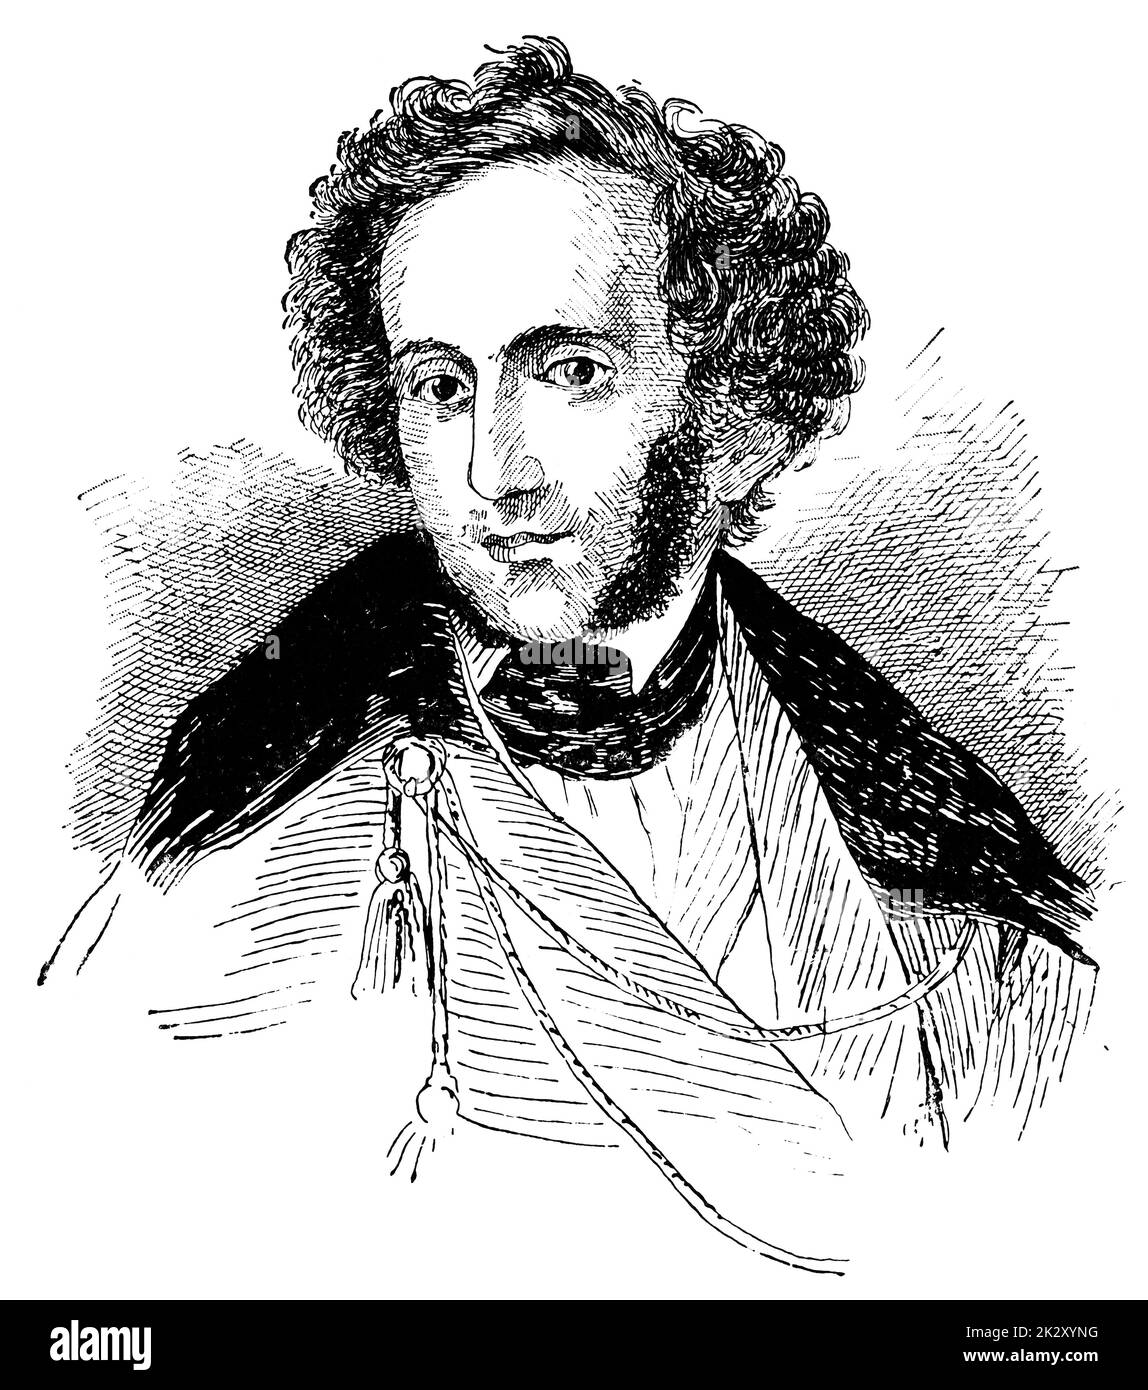 Portrait of Felix Mendelssohn - a German composer, pianist, organist and conductor of the early Romantic period. Illustration of the 19th century. White background. Stock Photo